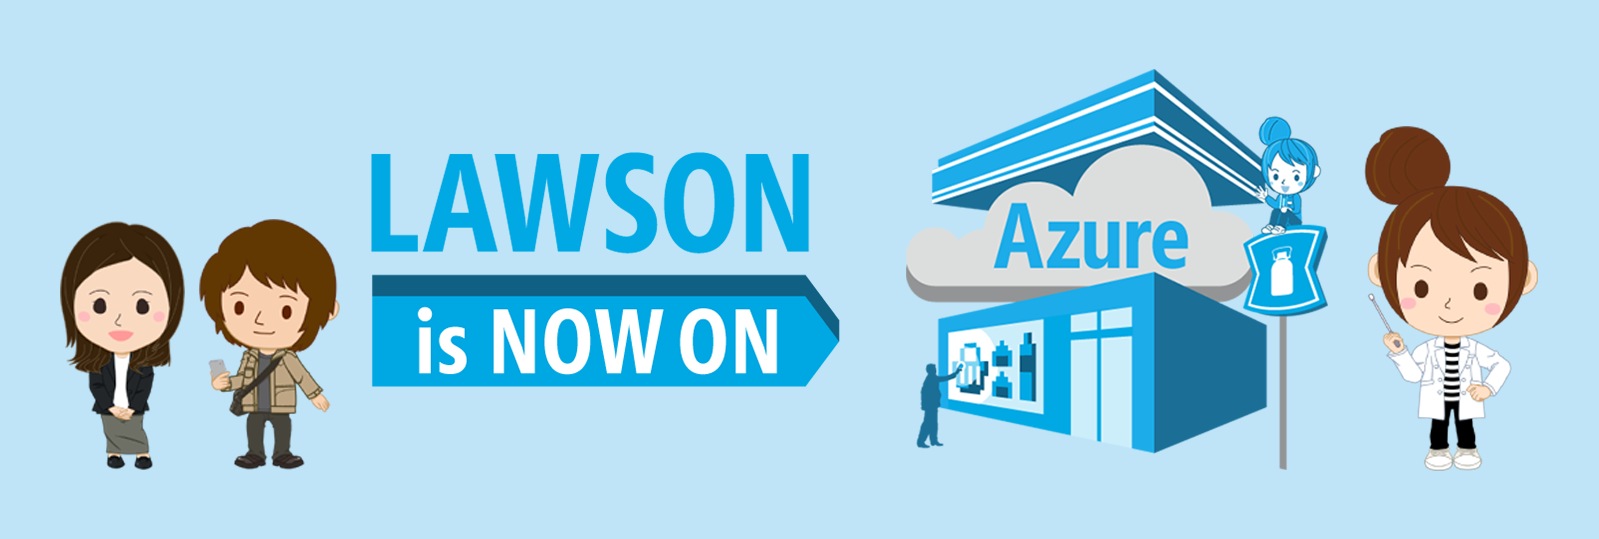 Lawson Is Now On Azure Microsoft For Business